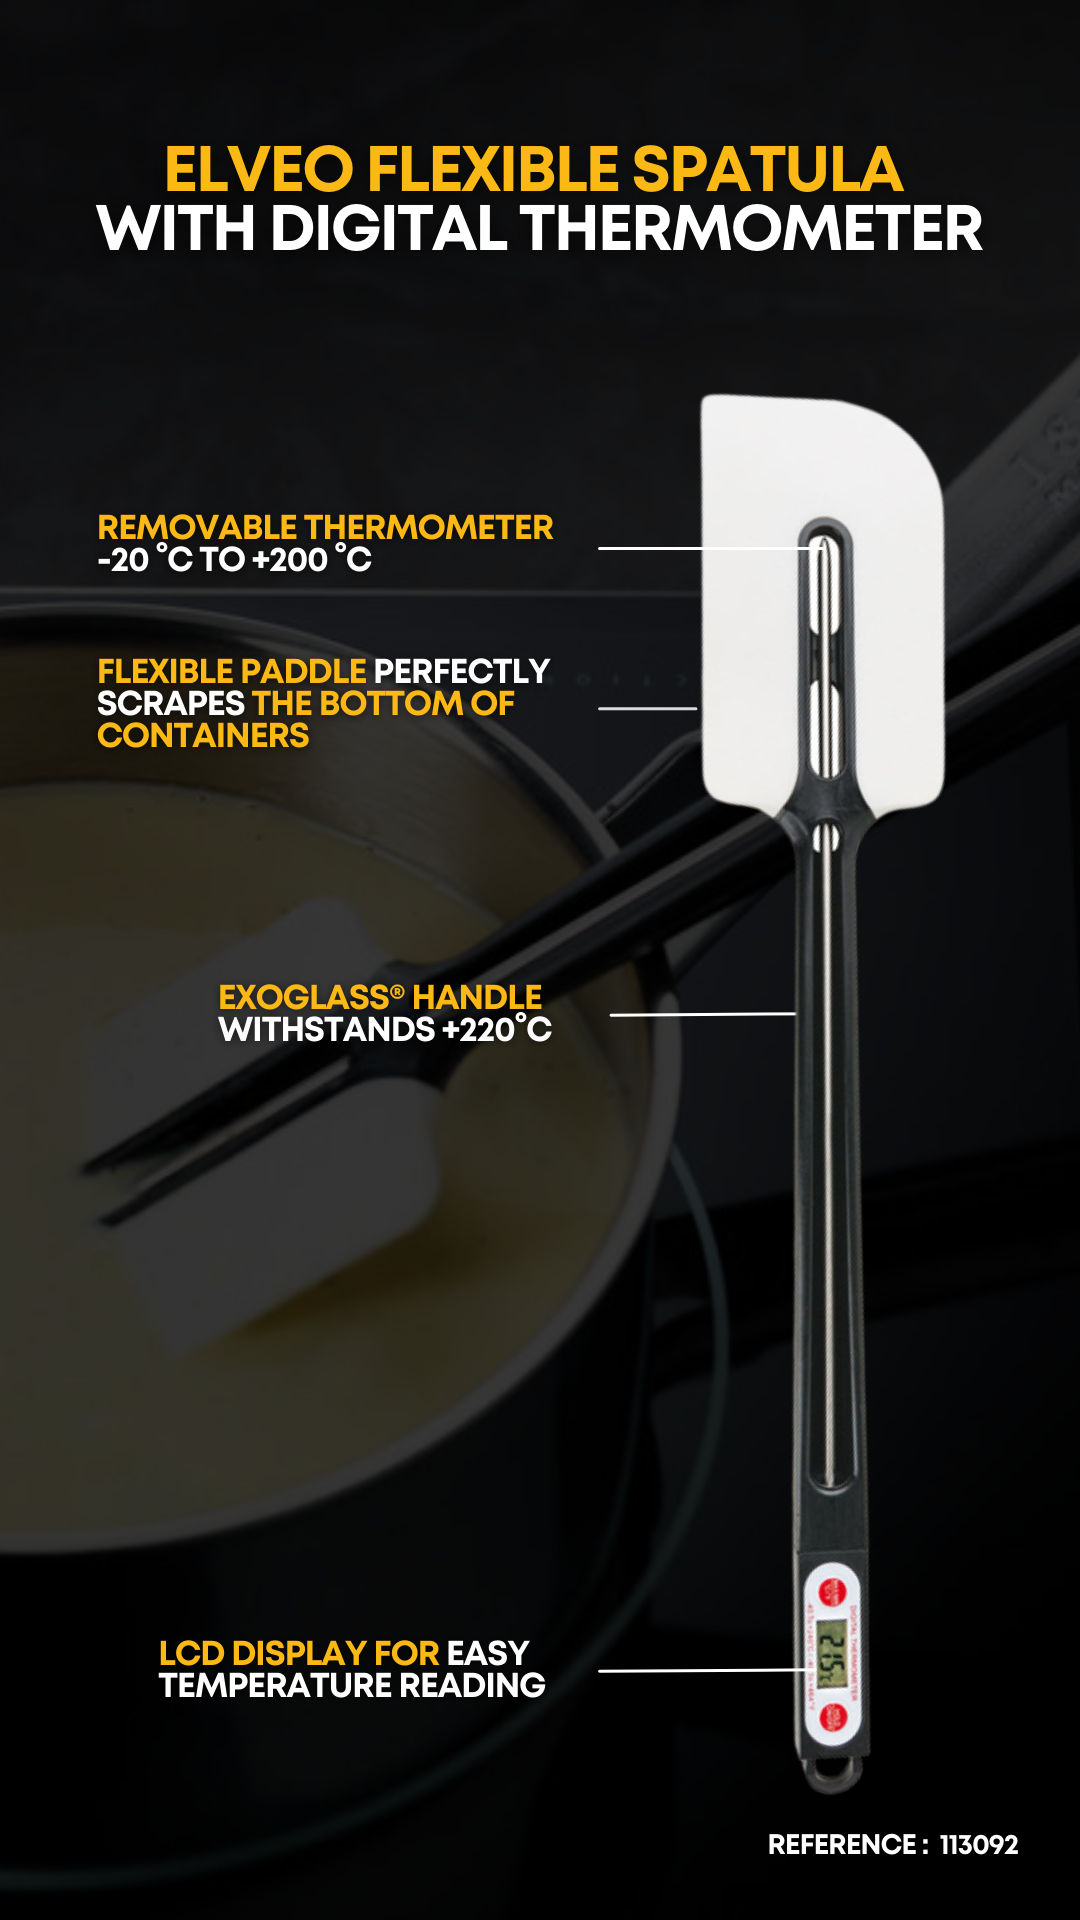 ELVEO FLEXIBLE SPATULA WITH DIGITAL THERMOMETER